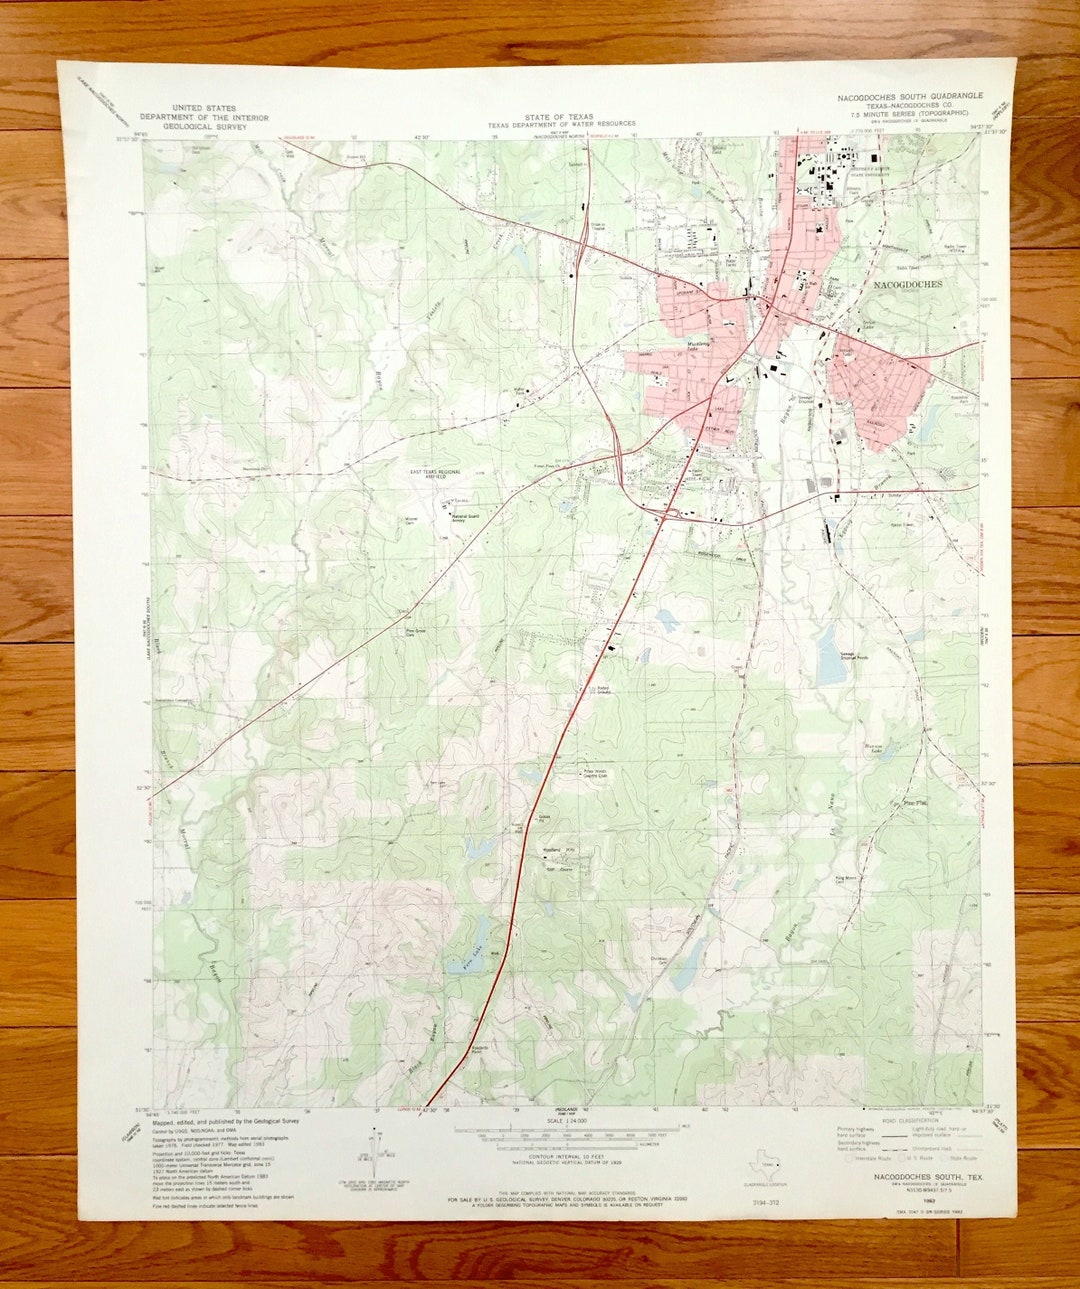 Antique Nacogdoches South Texas 1983 US Geological Survey pic